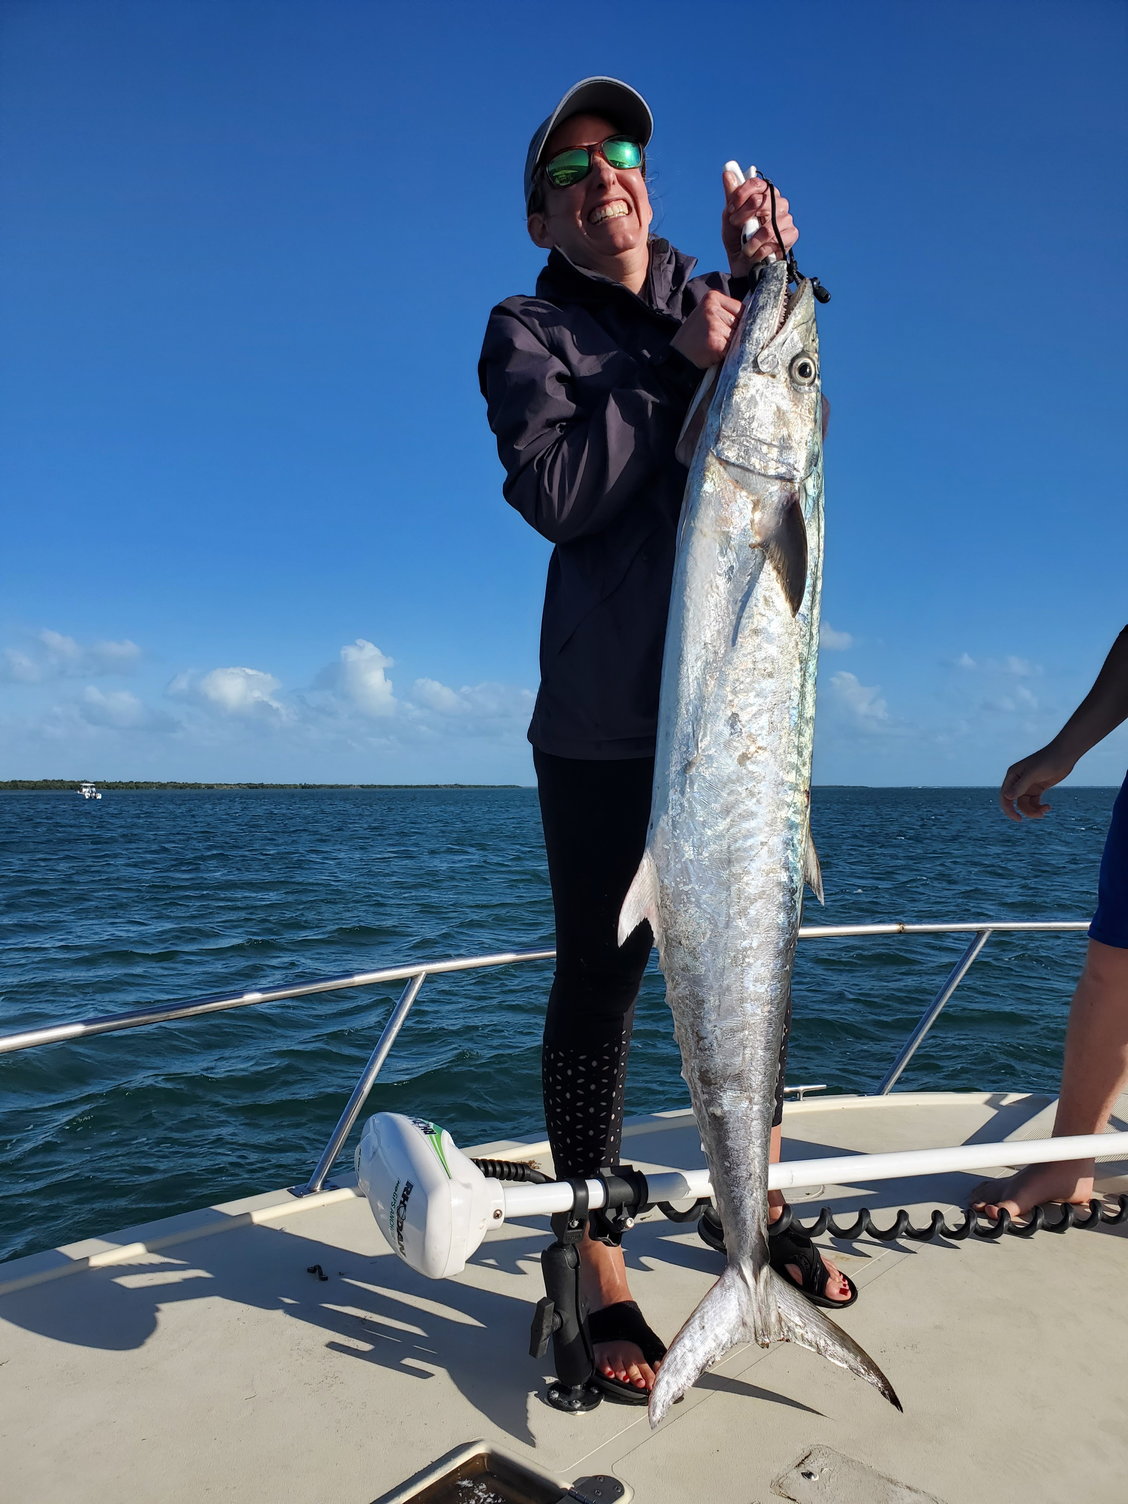 King mackerel approximate weight? - The Hull Truth - Boating and